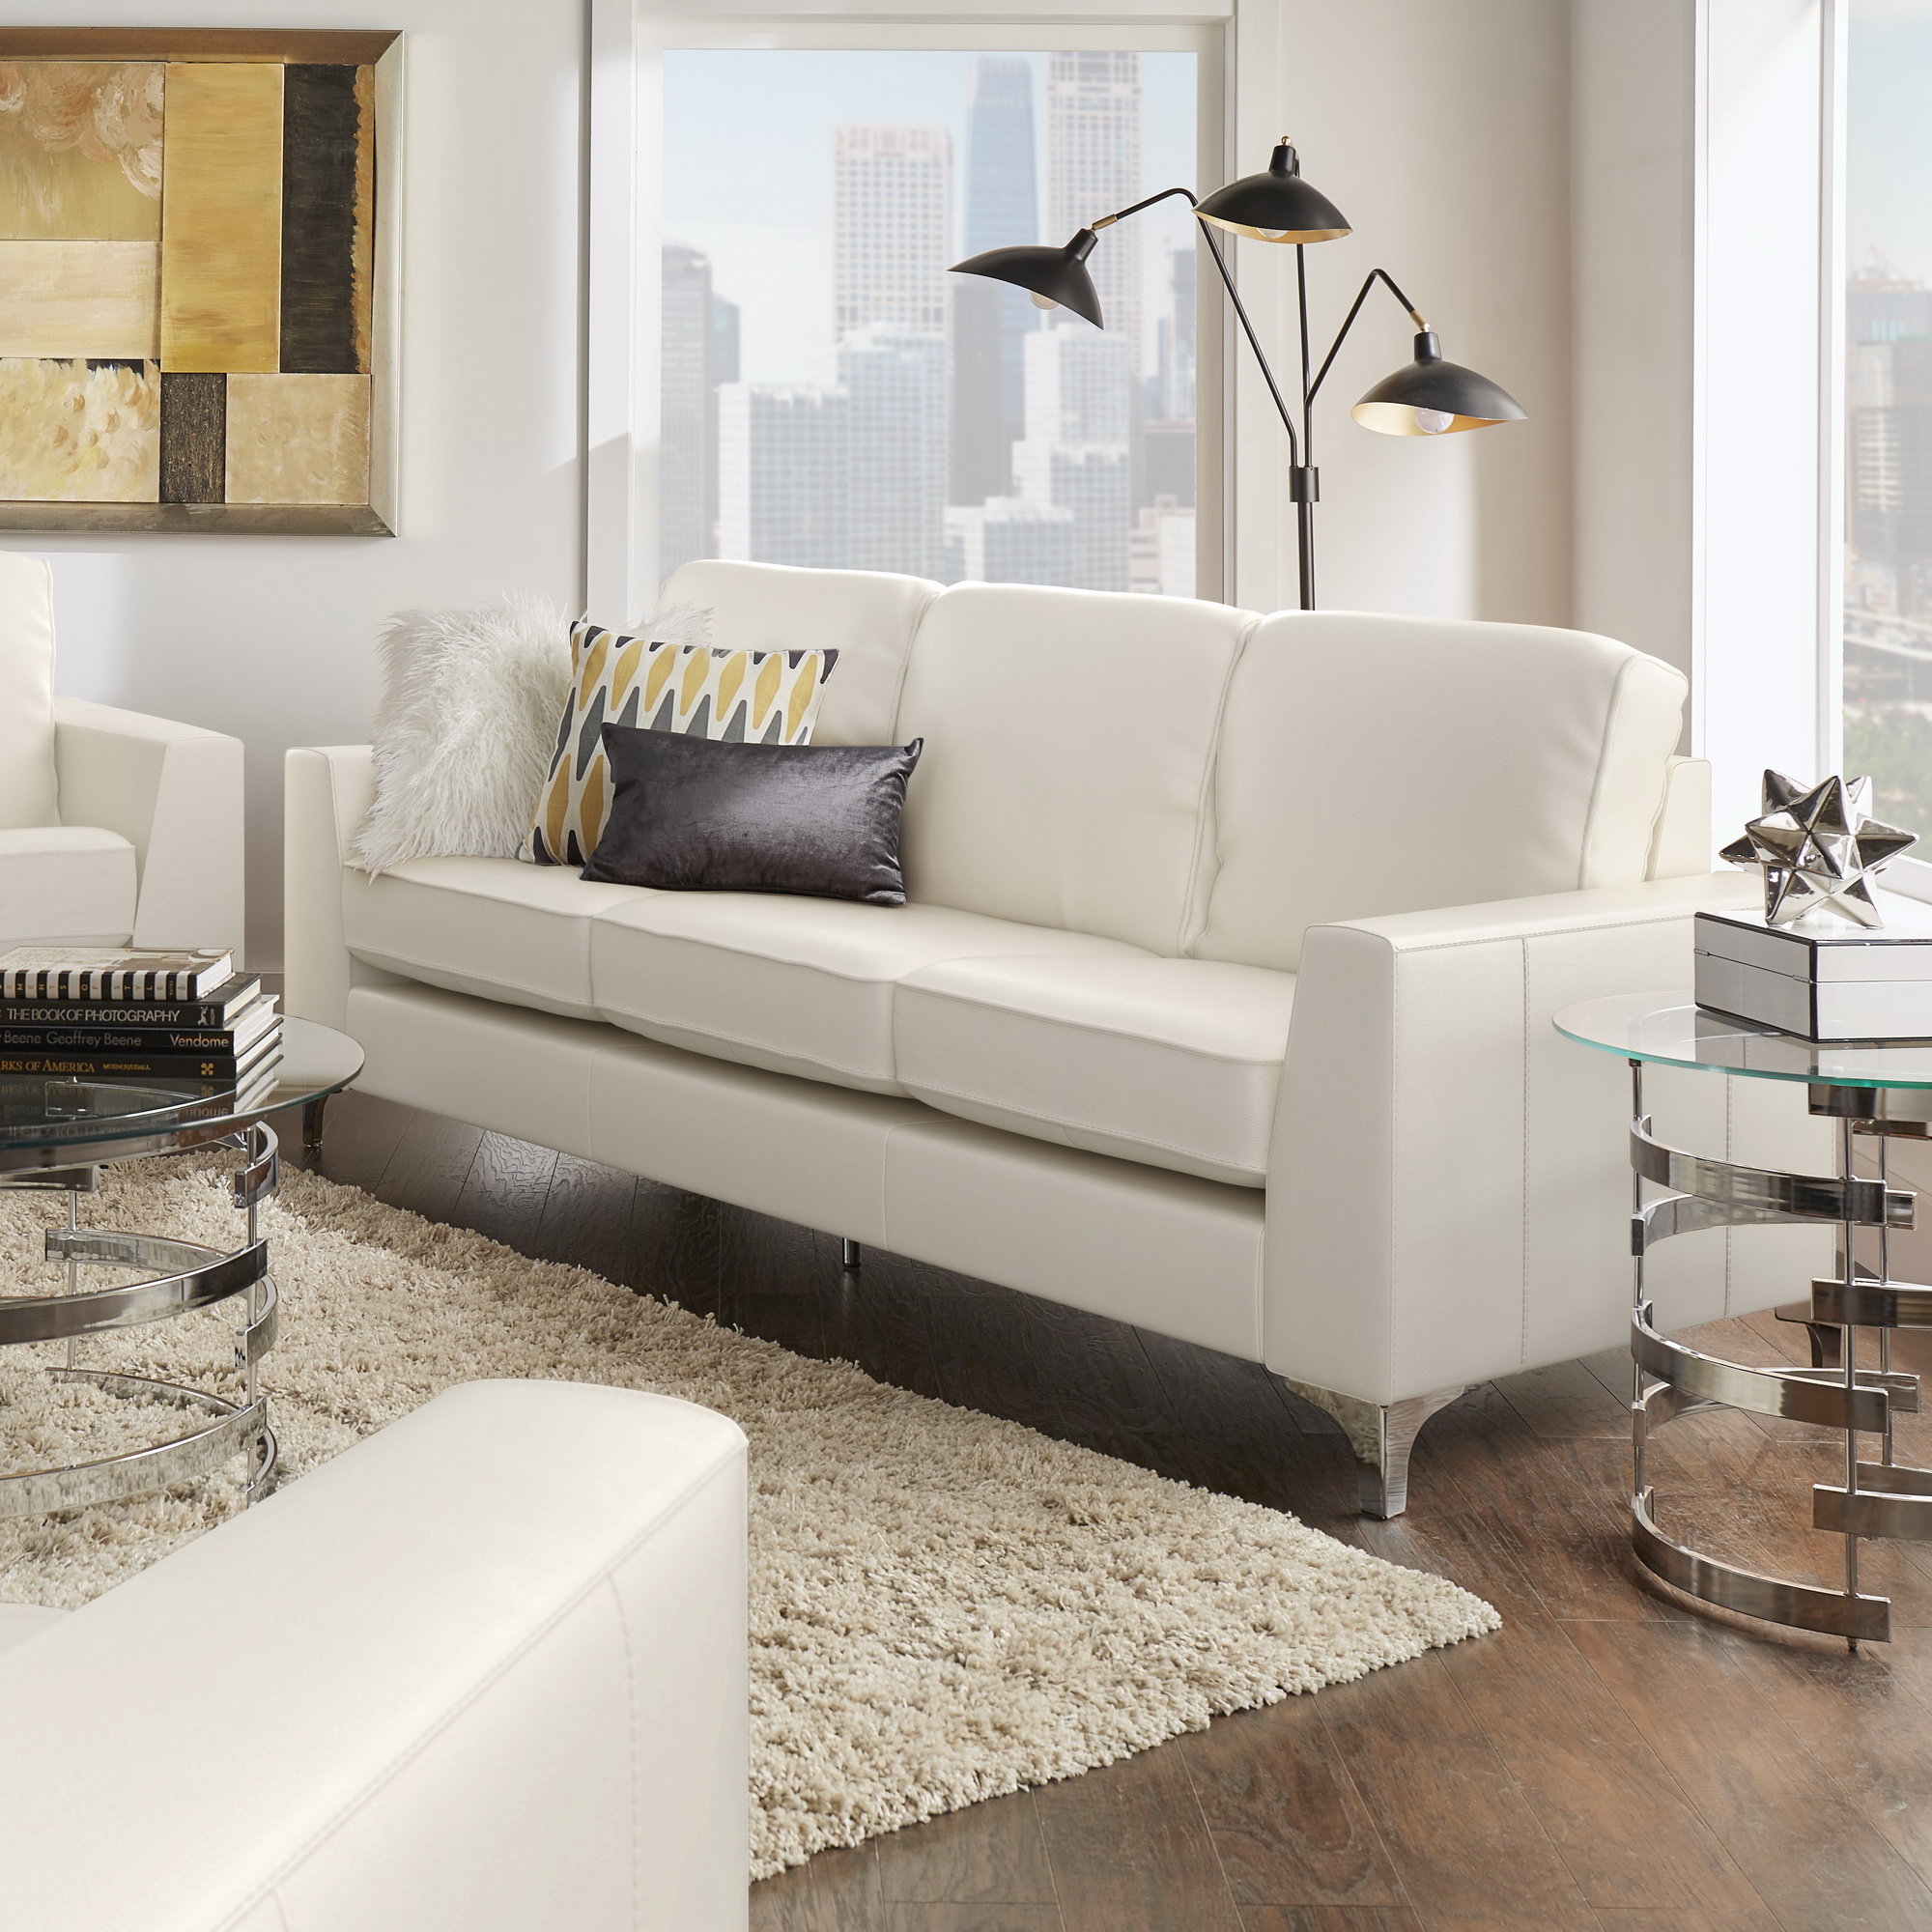 As we move into discussing real leather among furniture materials, this image showcases aniline leather. The focus of this image is the White Aniline Sofa by iNSPIRE Q Modern. This unique sofa is founded on chrome-finished bracket feet for some added glam.